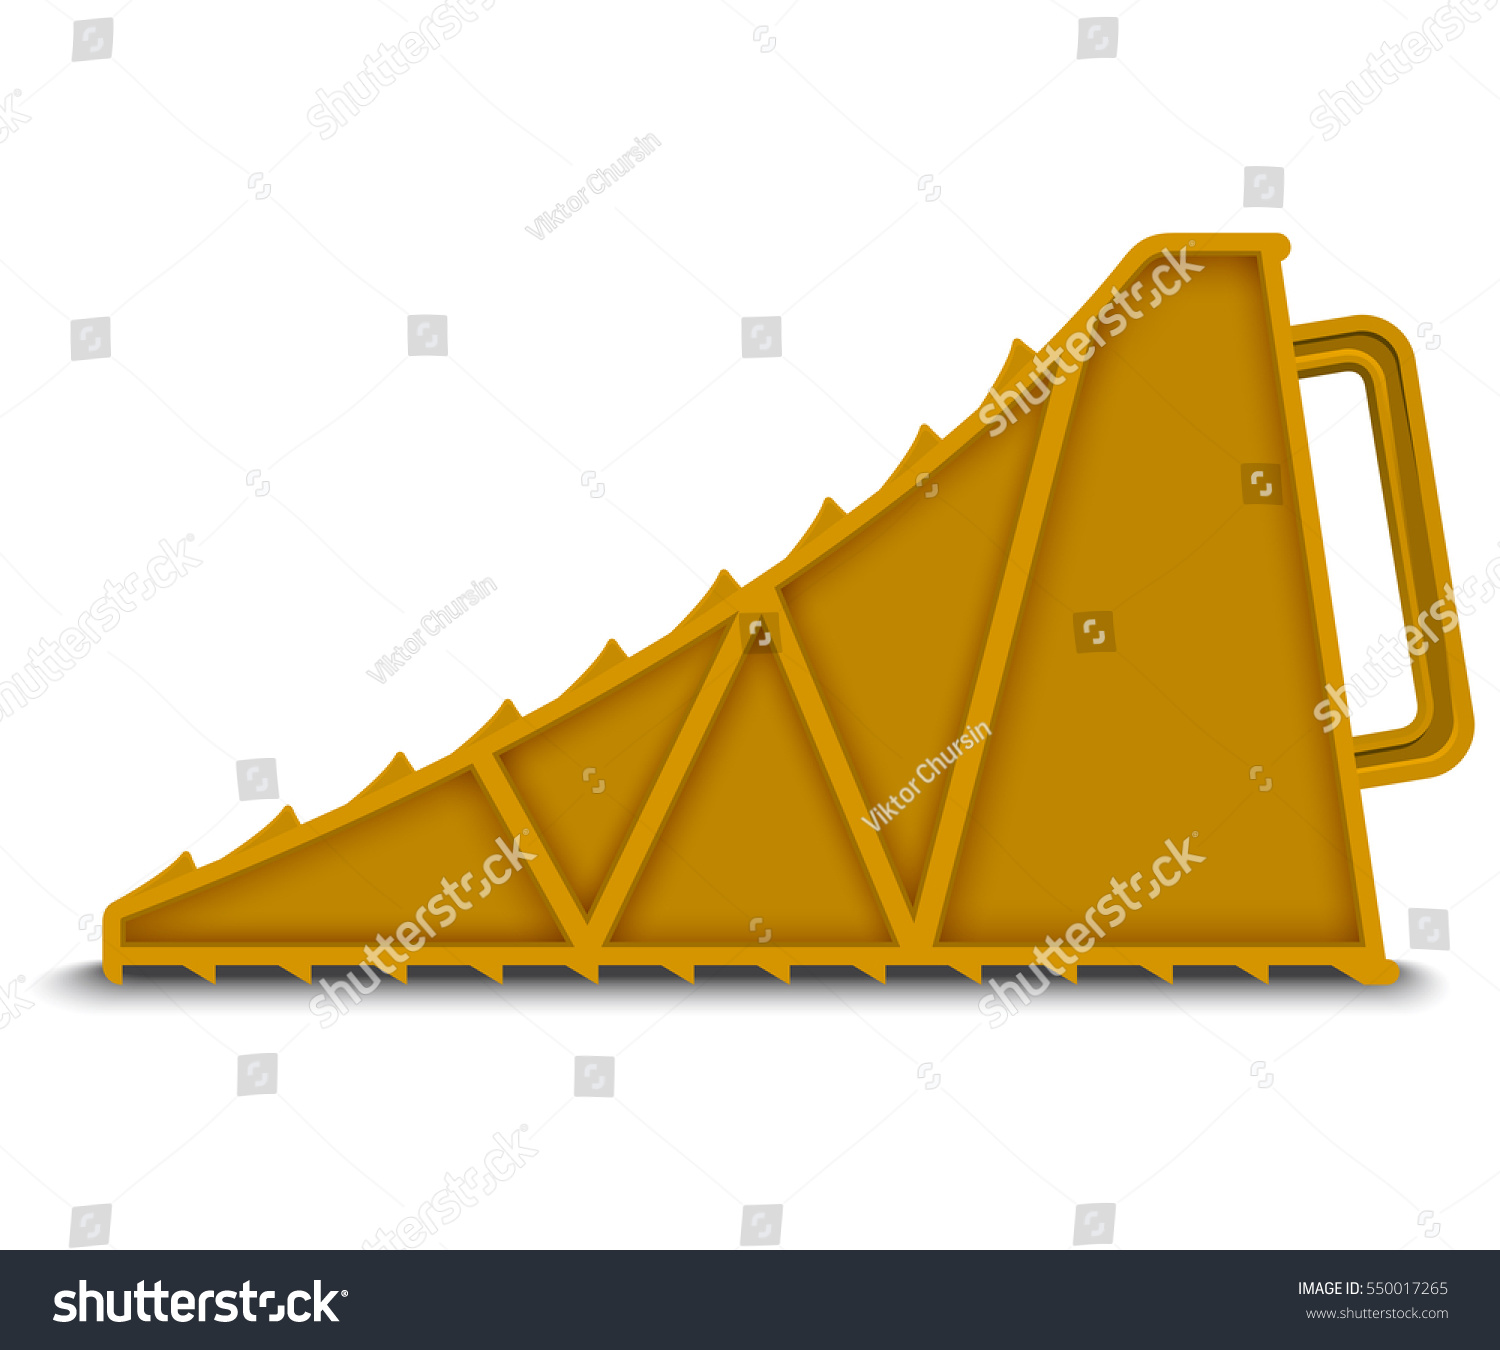 SVG of Wheel chock. Vector illustration isolated on white background svg